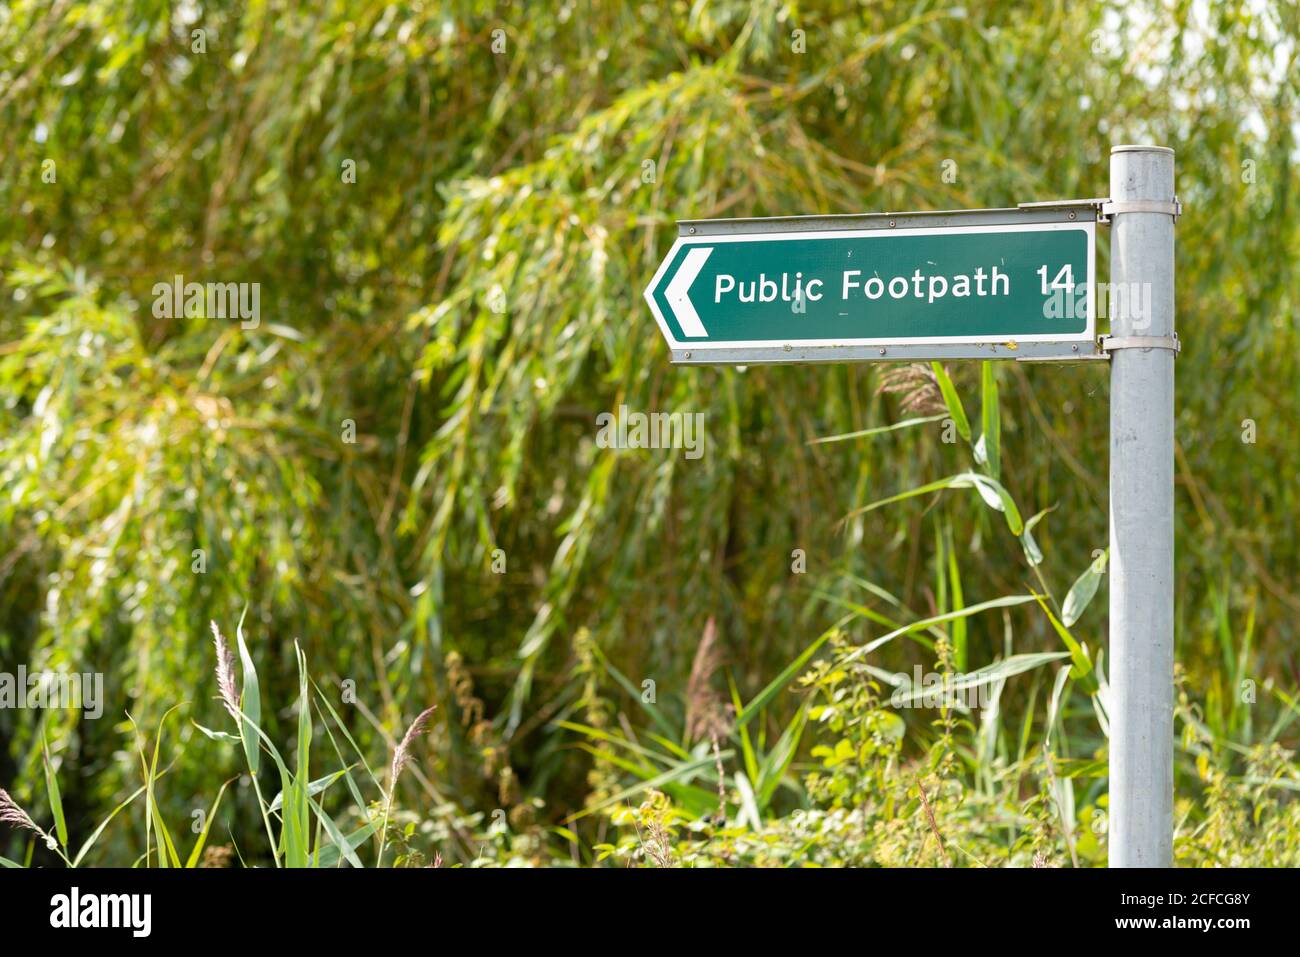 Public footpath 14 signpost in Great Wakering, Essex, UK. Public right of way route number 14 sign post in rural countryside area. Walking route Stock Photo